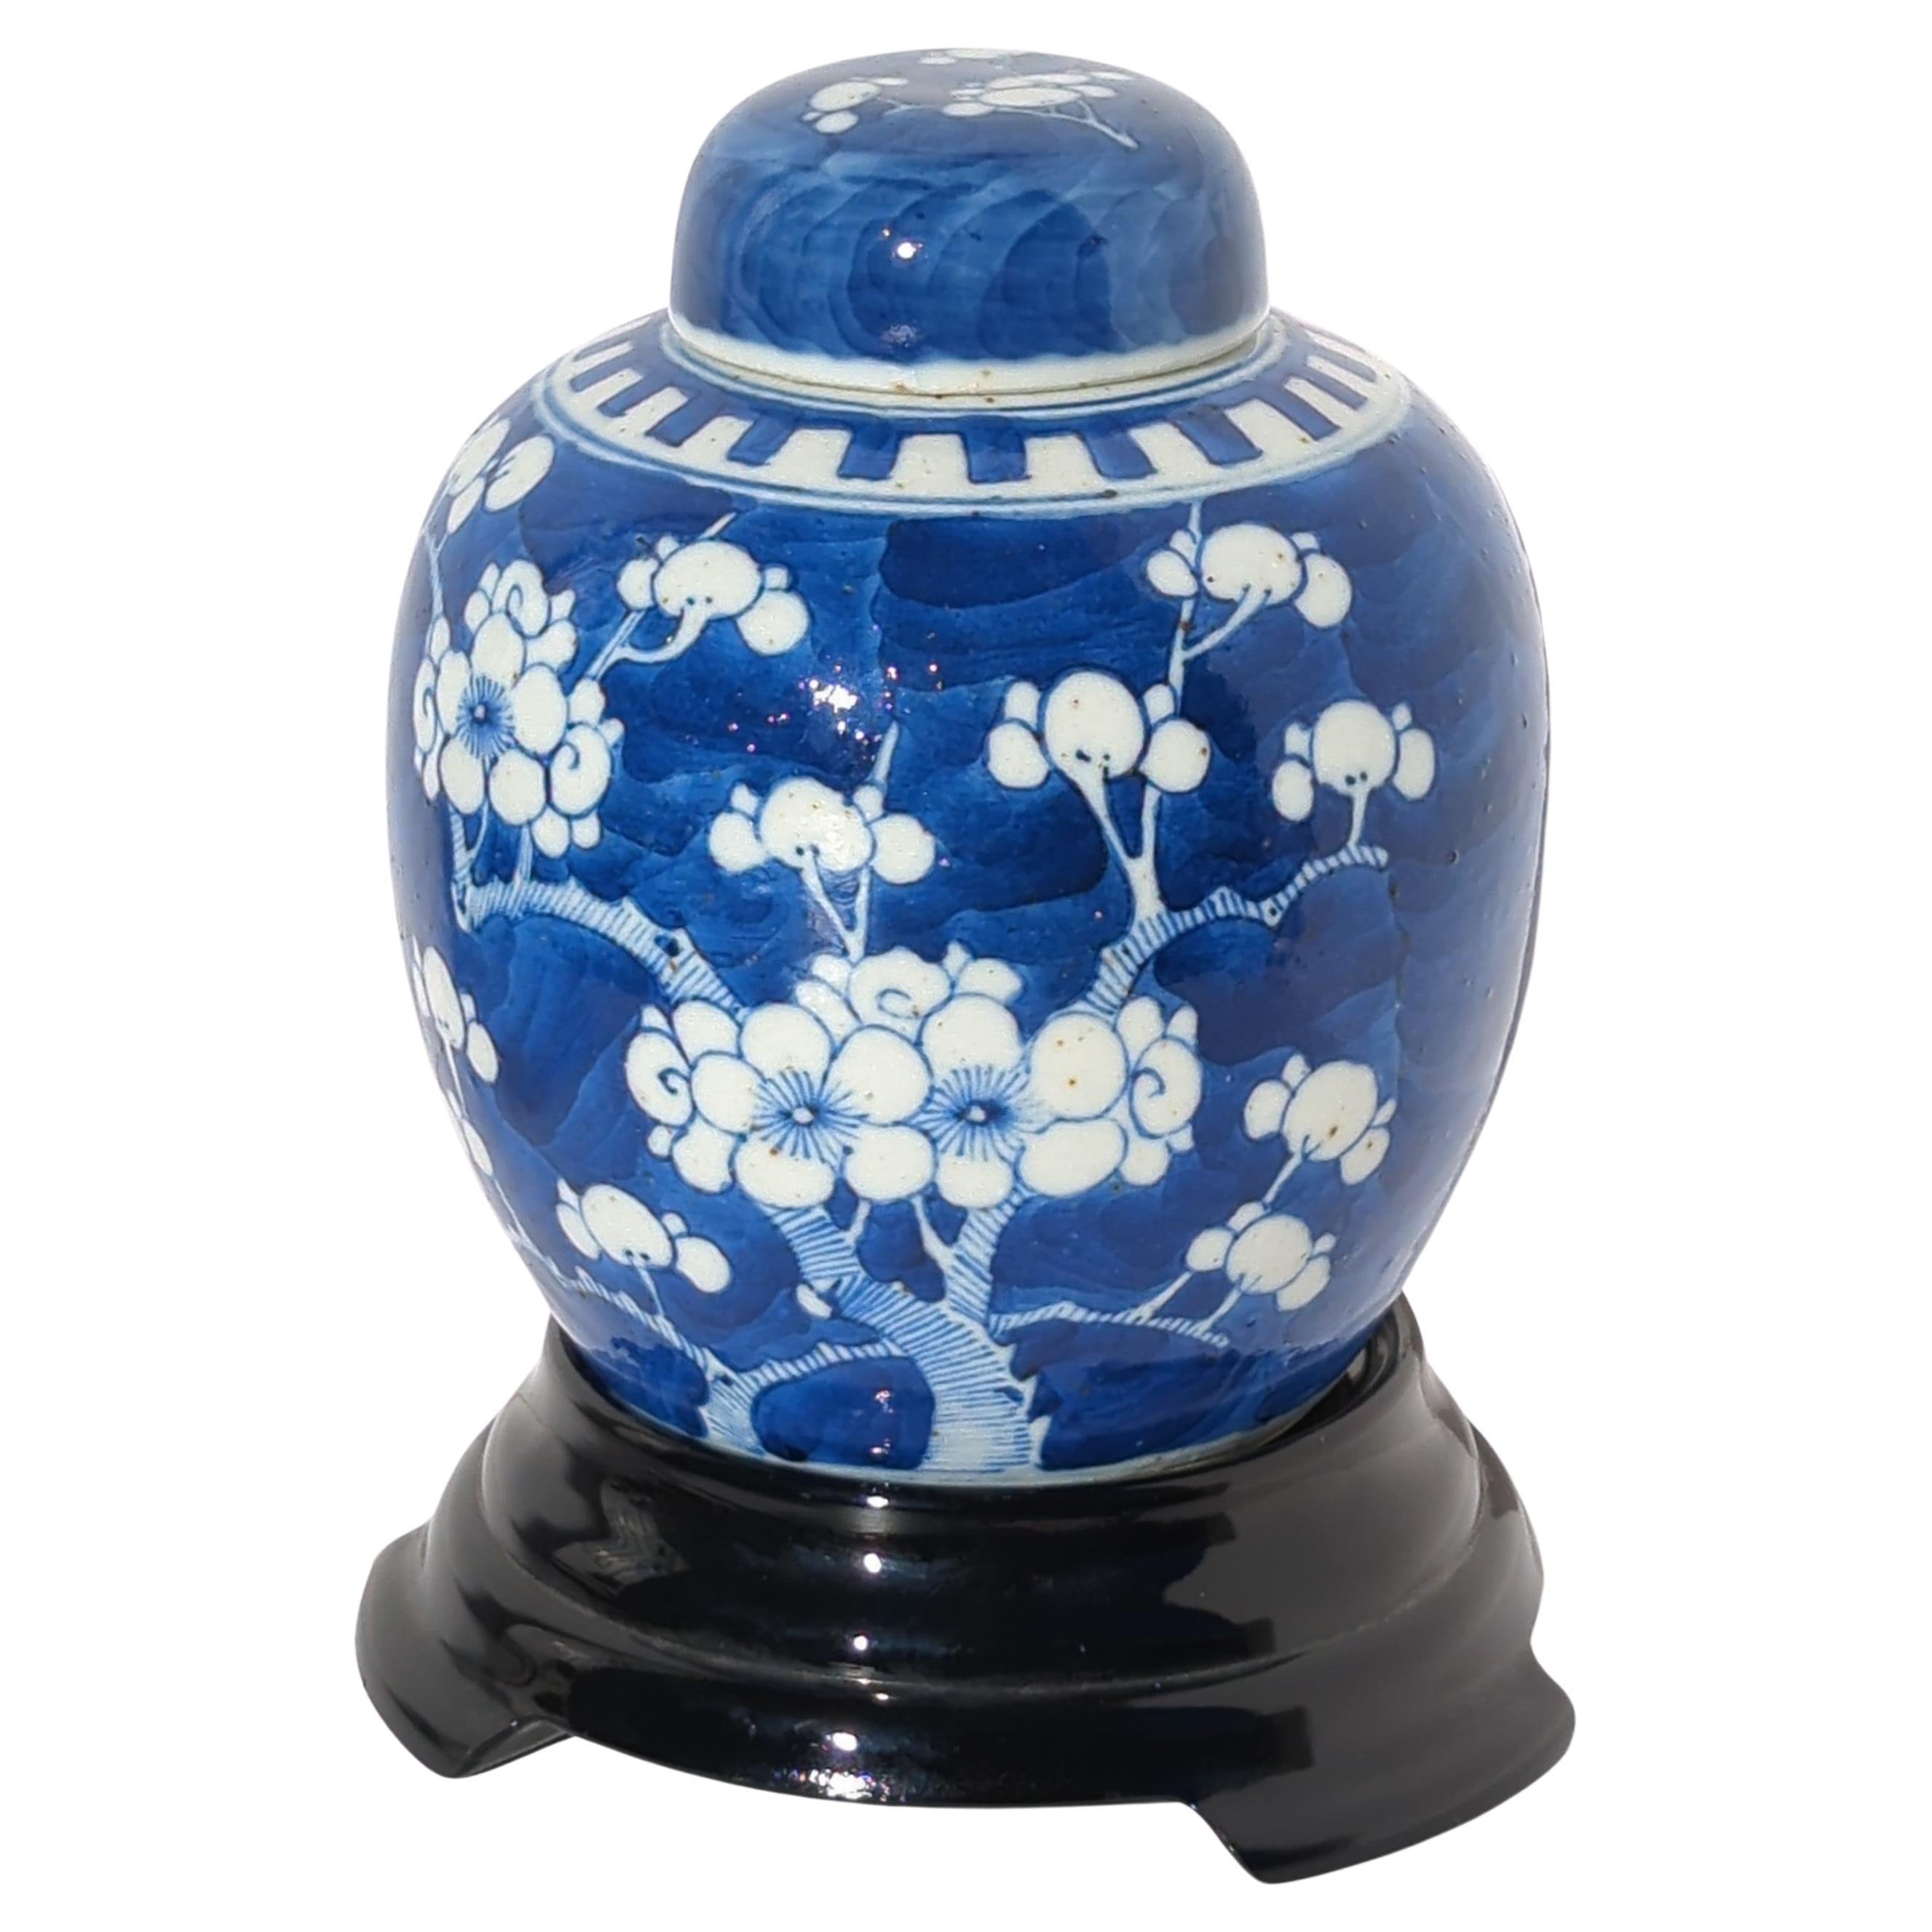 Chinese Export Antique Chinese Blue & White Prunus Blossoms Covered Ginger Jar Vase Early 20c